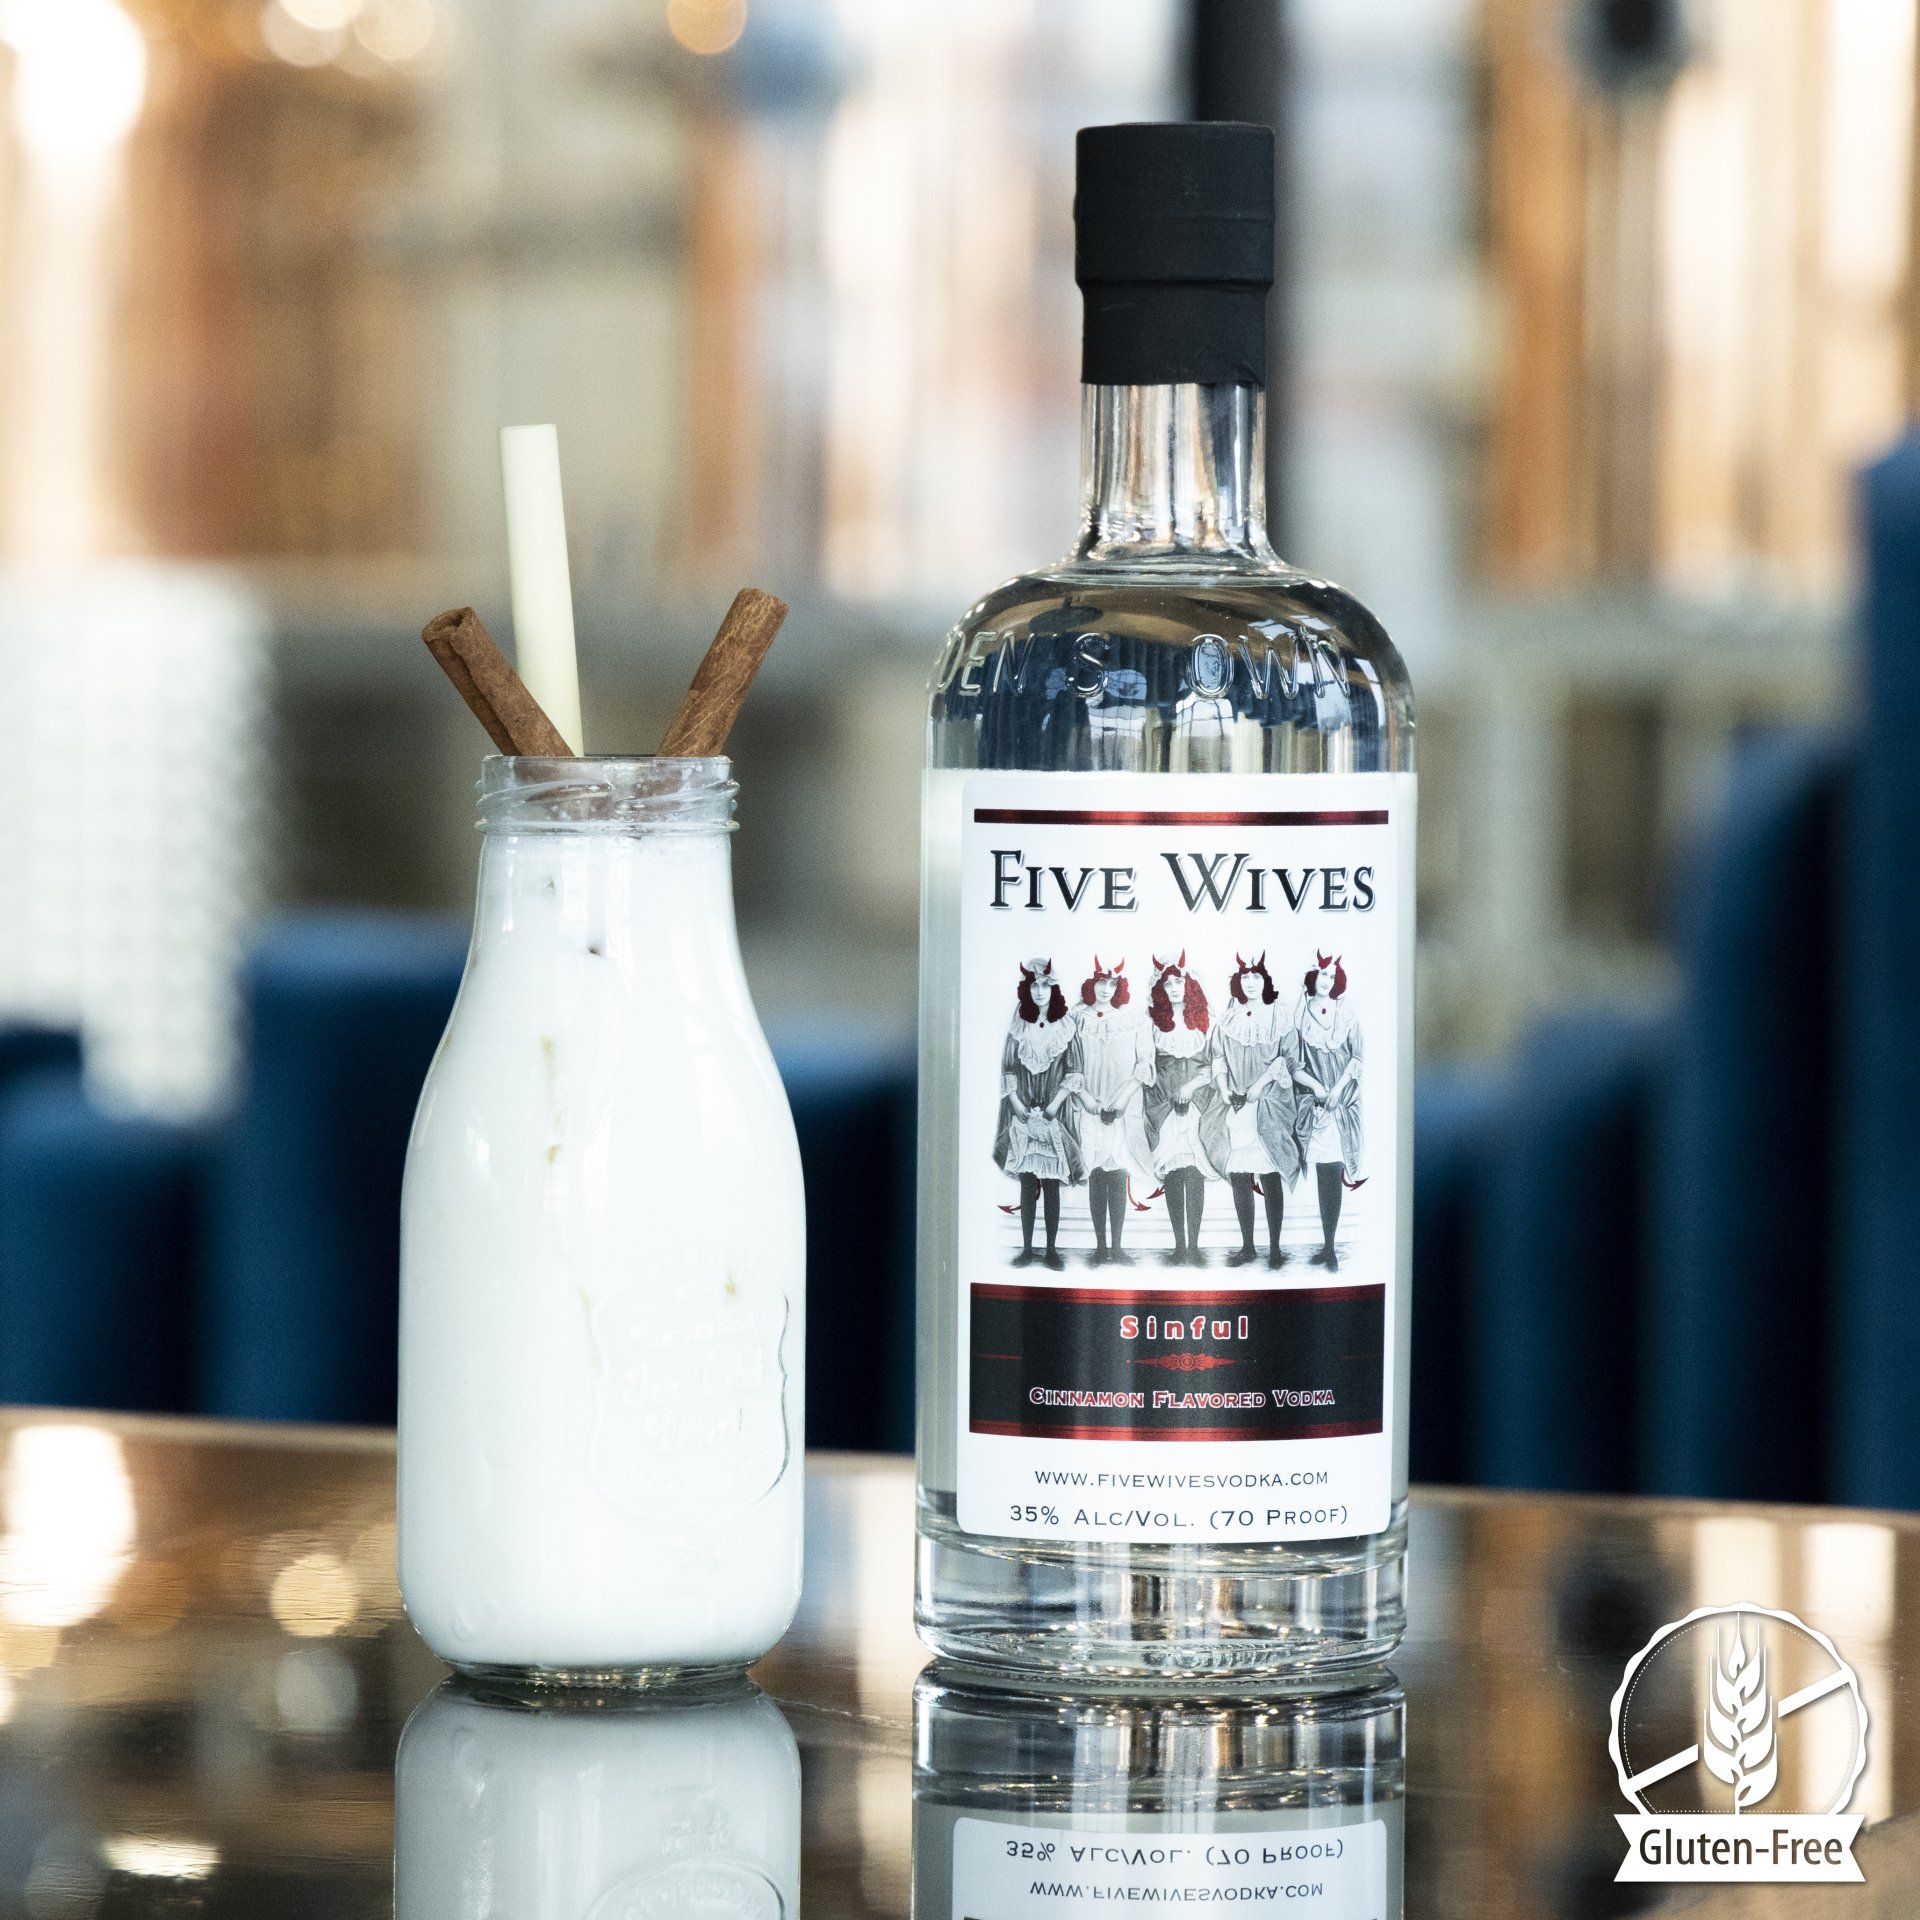 Five Wives Vodka Sinful